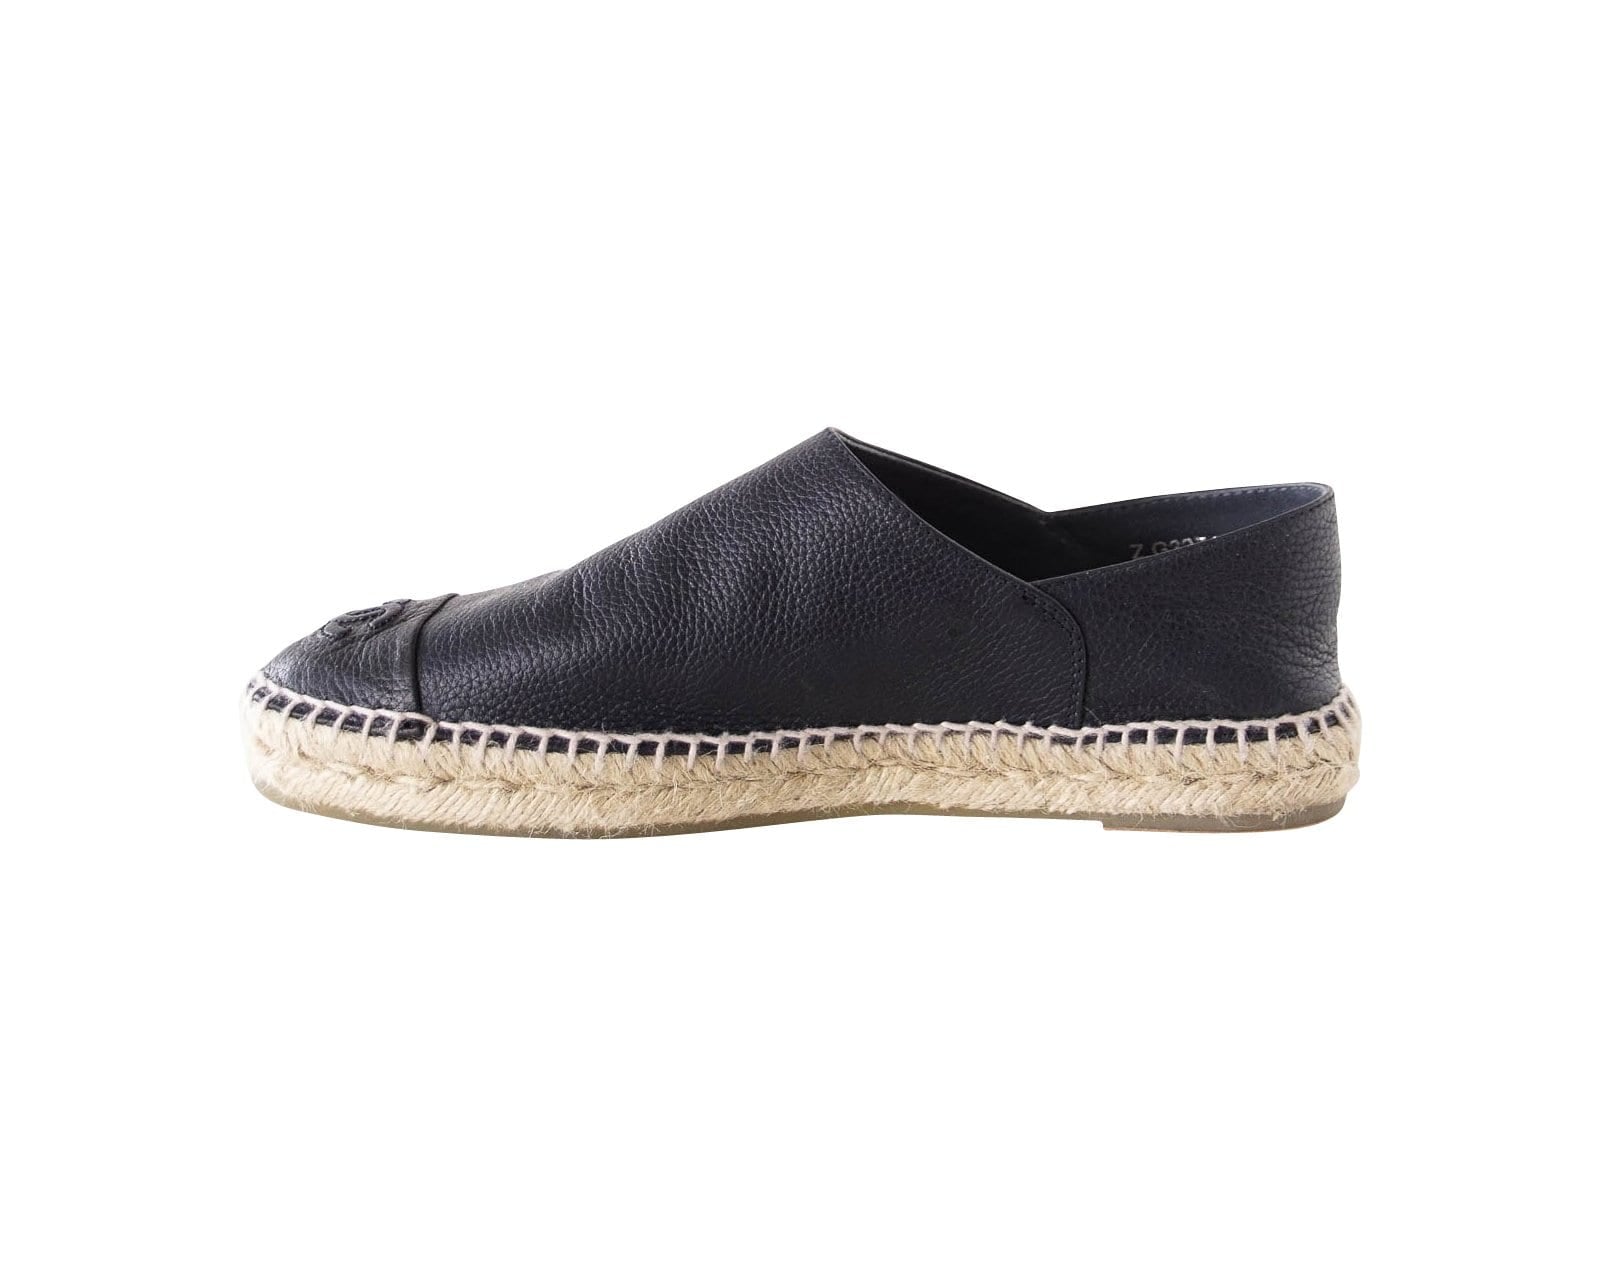 Chanel Shoe Espadrilles Cambon Loafers Dark Navy Leather 39 / 9 rare - mightychic